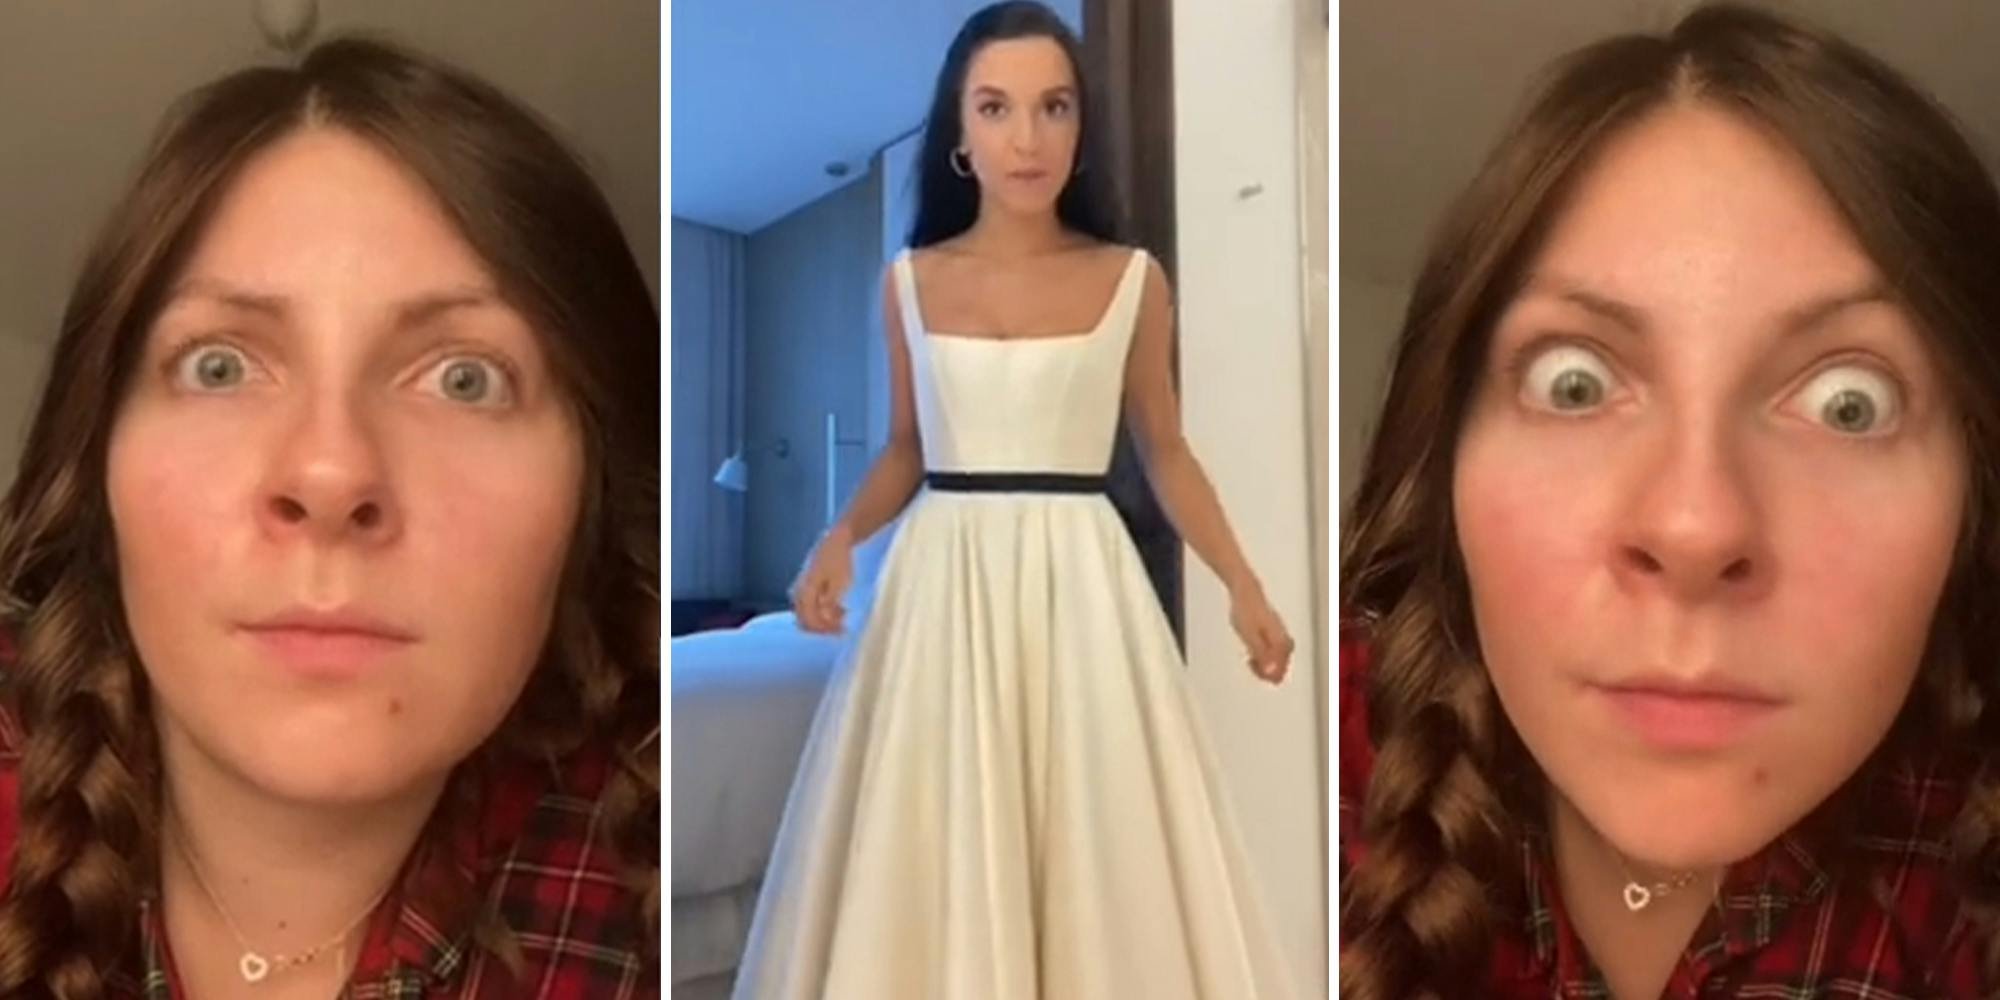 'White dress and red wine goes really well together': Woman wears white to her sister's wedding